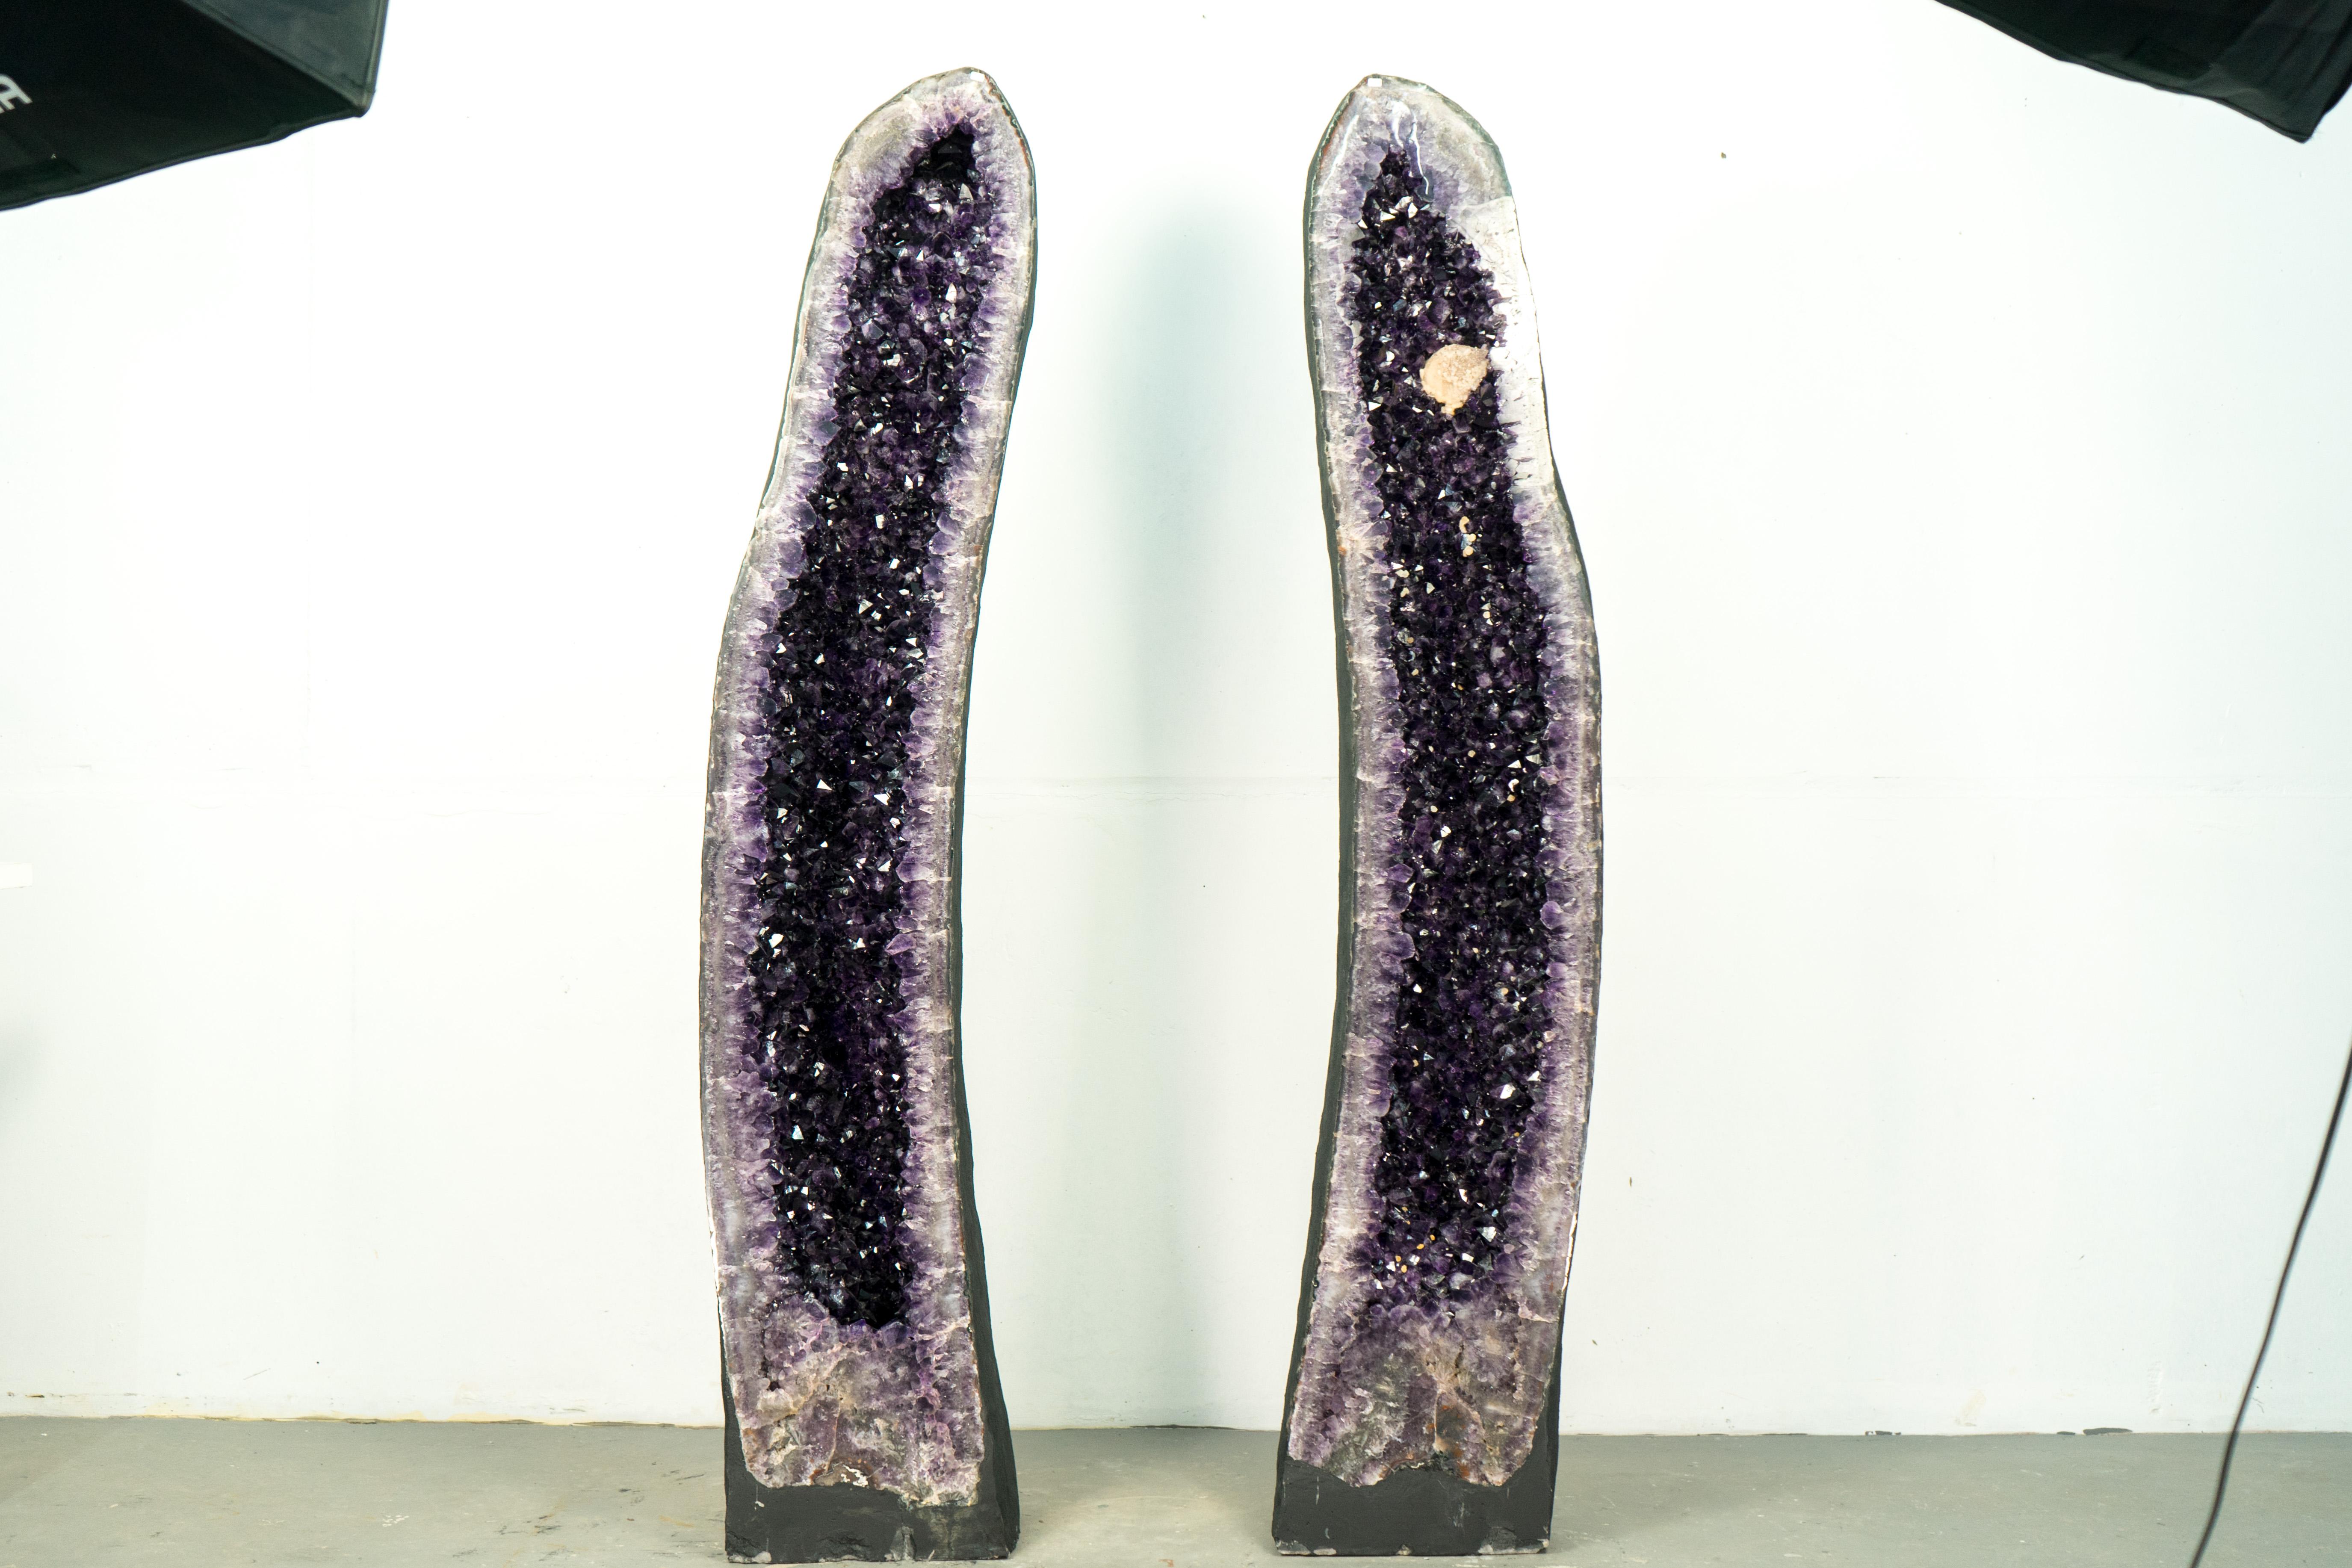 Bookmatching Pair of Big, X-Large Amethyst Geodes Featuring High-Grade Deep Purple Amethyst Druzy and an Intact Calcite

▫️ Description

These Giant Cathedral Amethyst Geodes, rare earth treasures, effortlessly transform any space into a luxurious